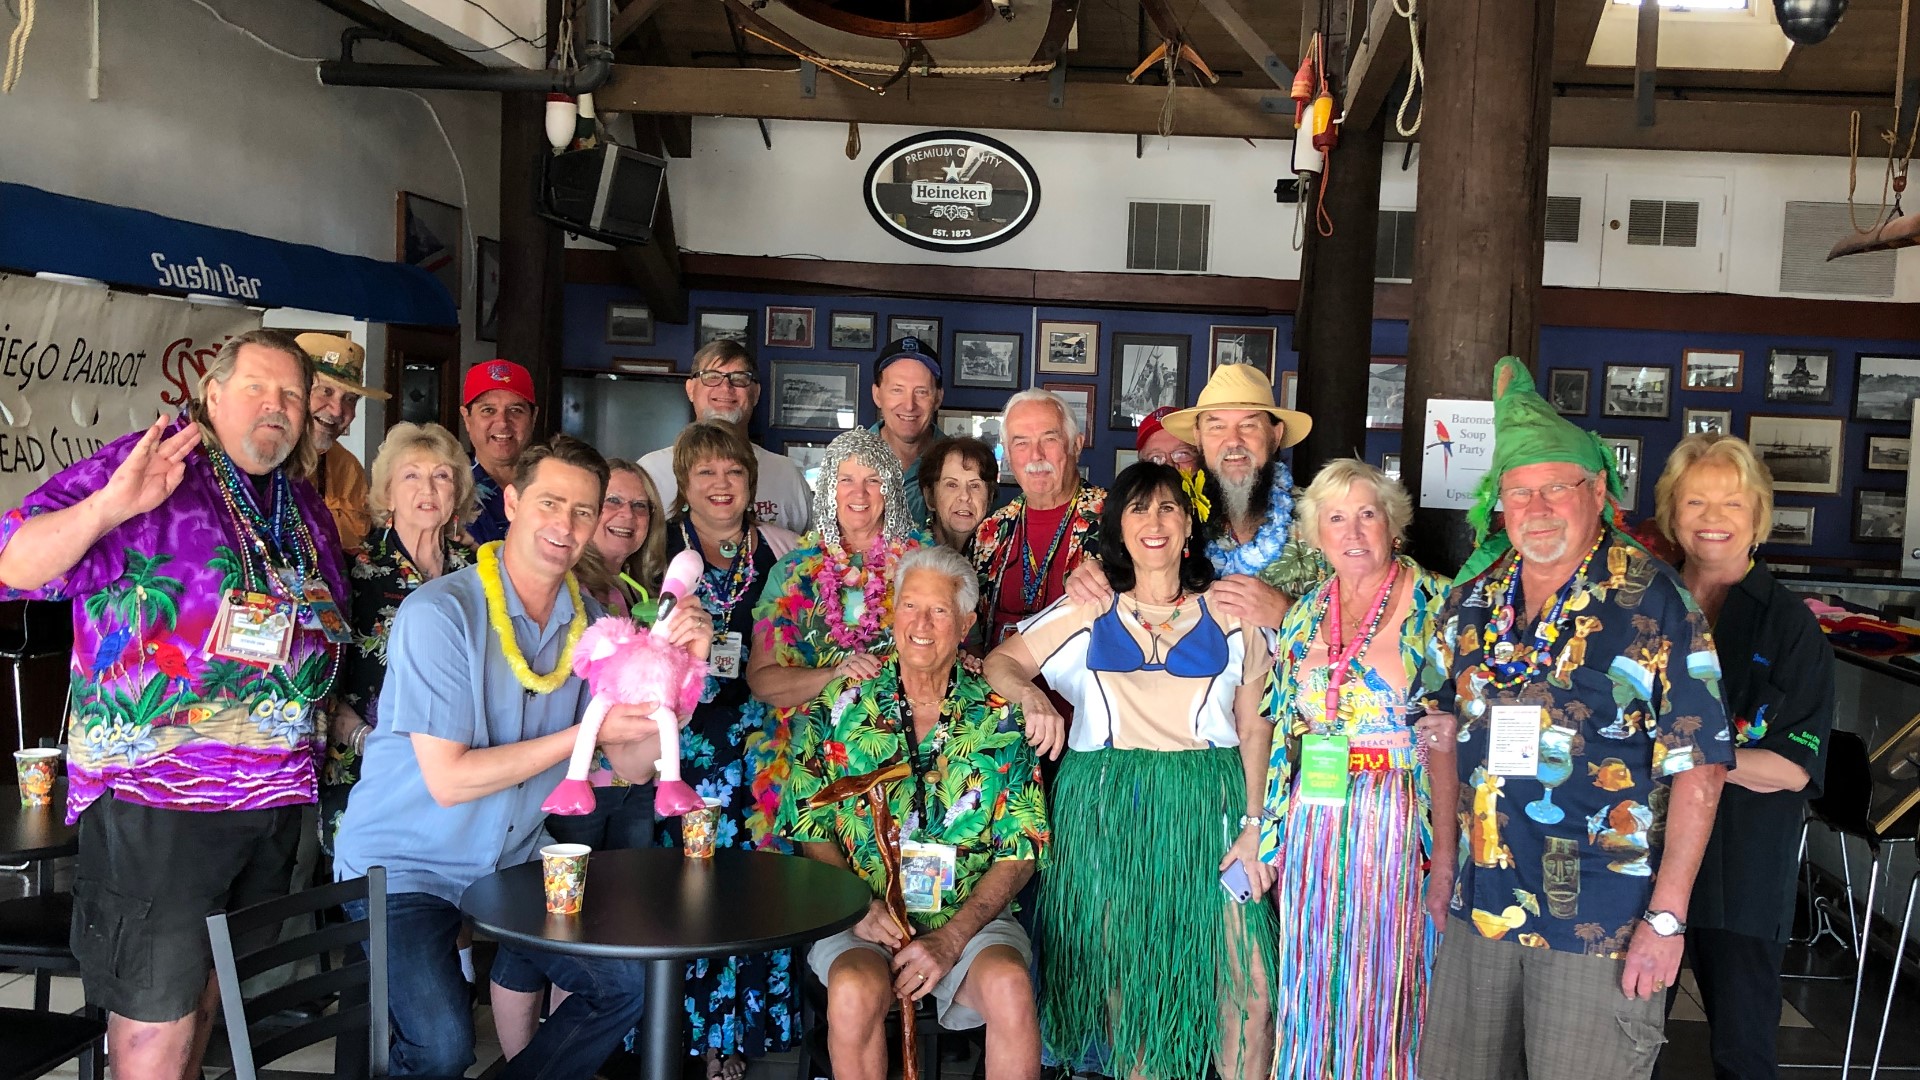 San Diego Parrot Head Club has donated nearly $600,000 to local charities.